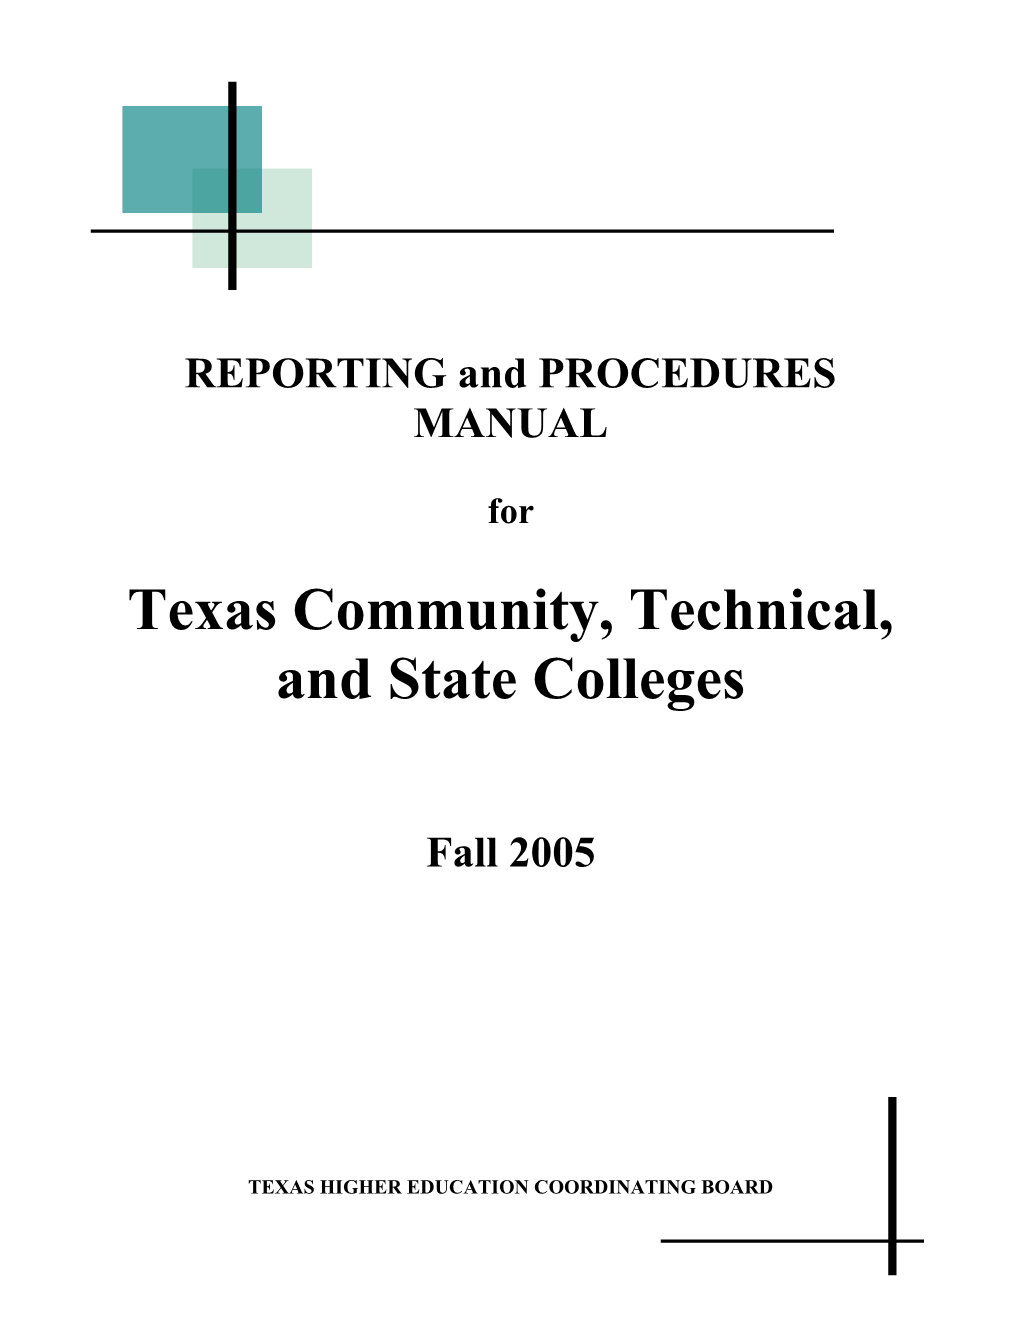 Reporting and Procedures Manual for Texas Community, Technical, and State Colleges, Fall 2005